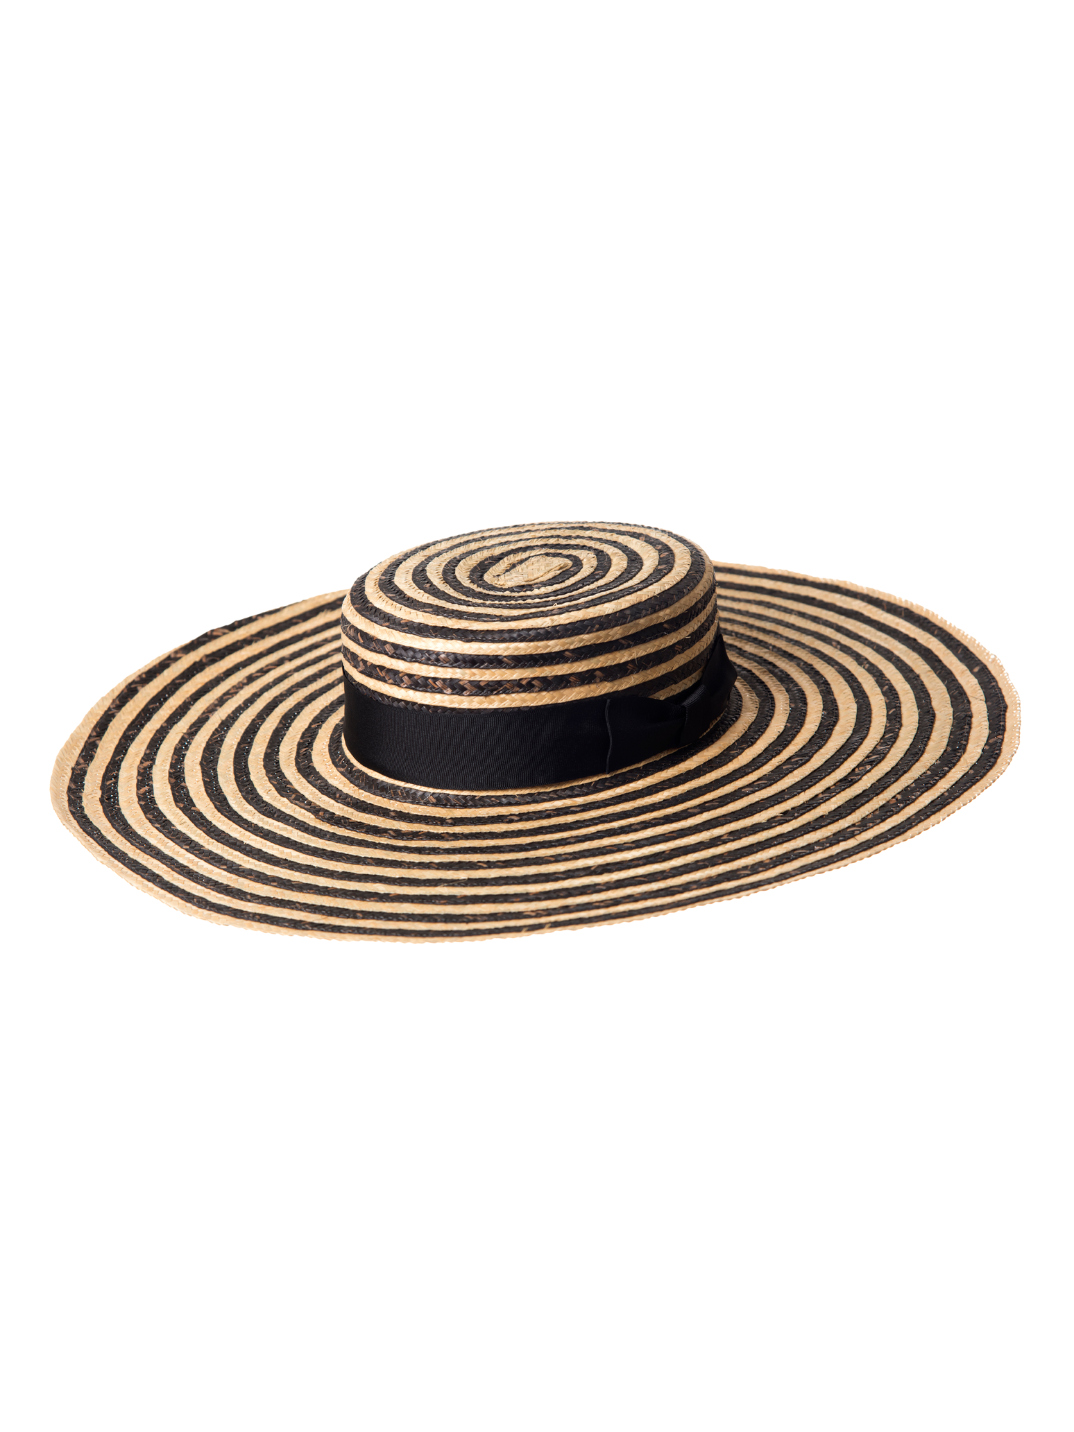 stripe beige and black straw hat with felt ribbon Lina Osorio Colombian ethically-made hat